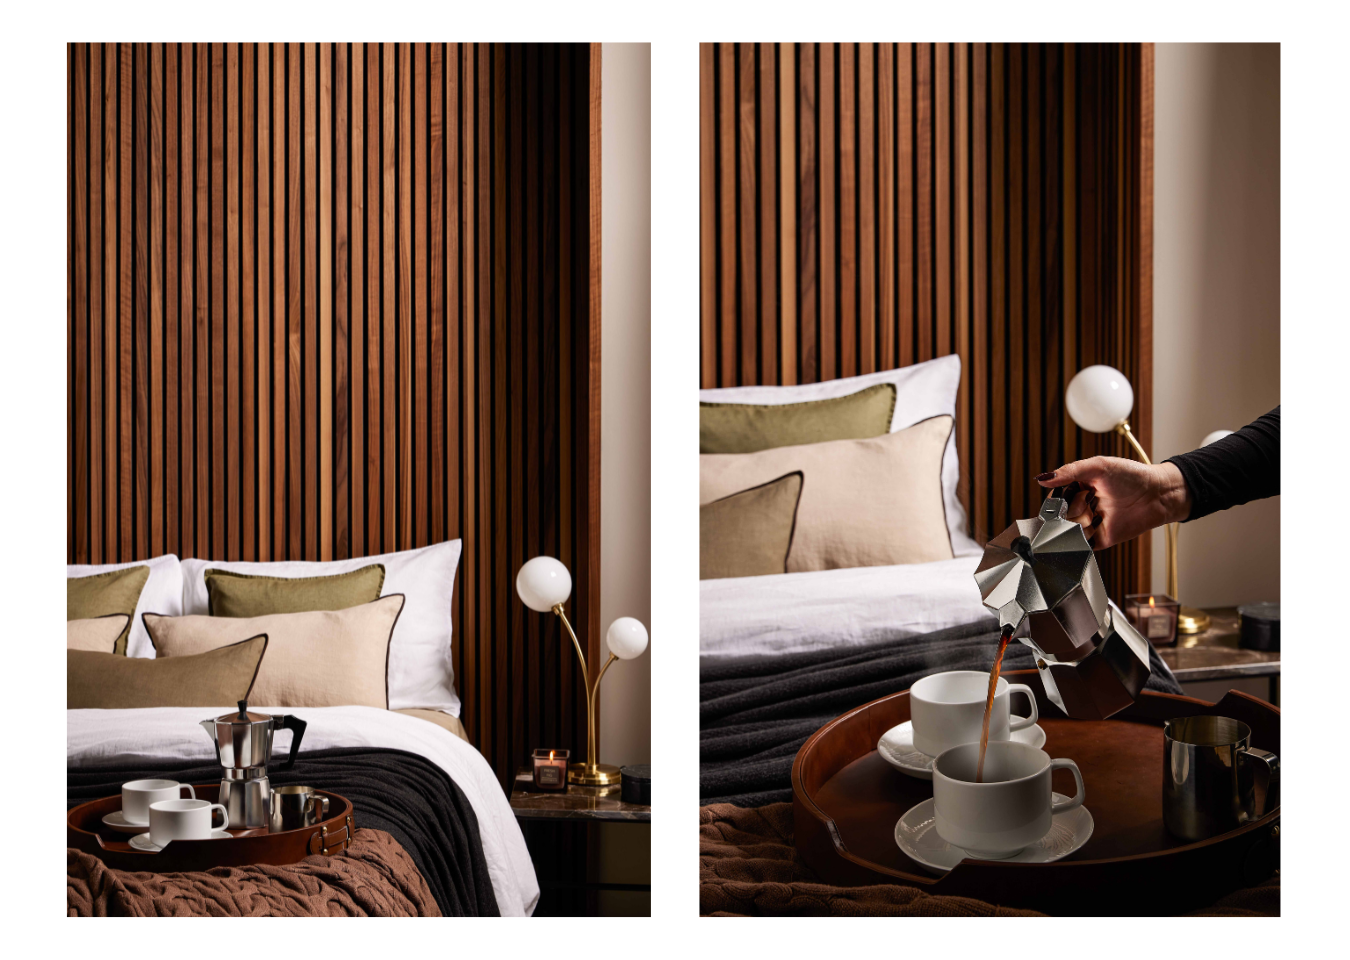 Left: a headboard made from SlatWall Deep Walnut wall panels. Right: someone pours coffee into a cup on a tray on the bed.